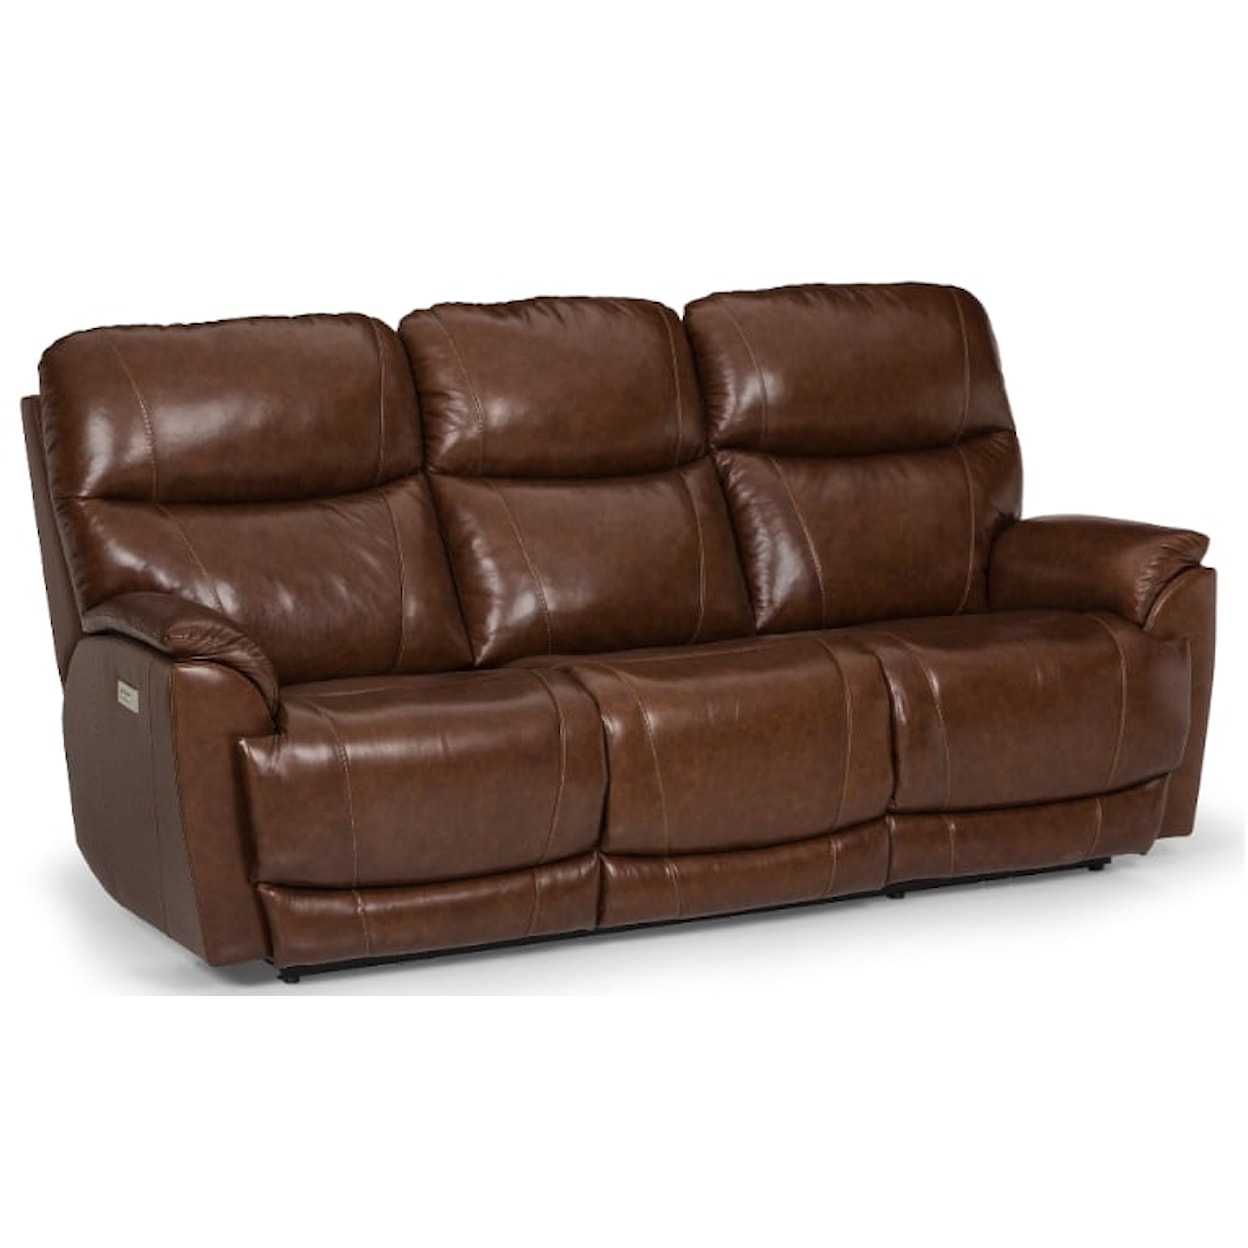 Sunset Home 729 Power Reclining Sofa with Power Headrests